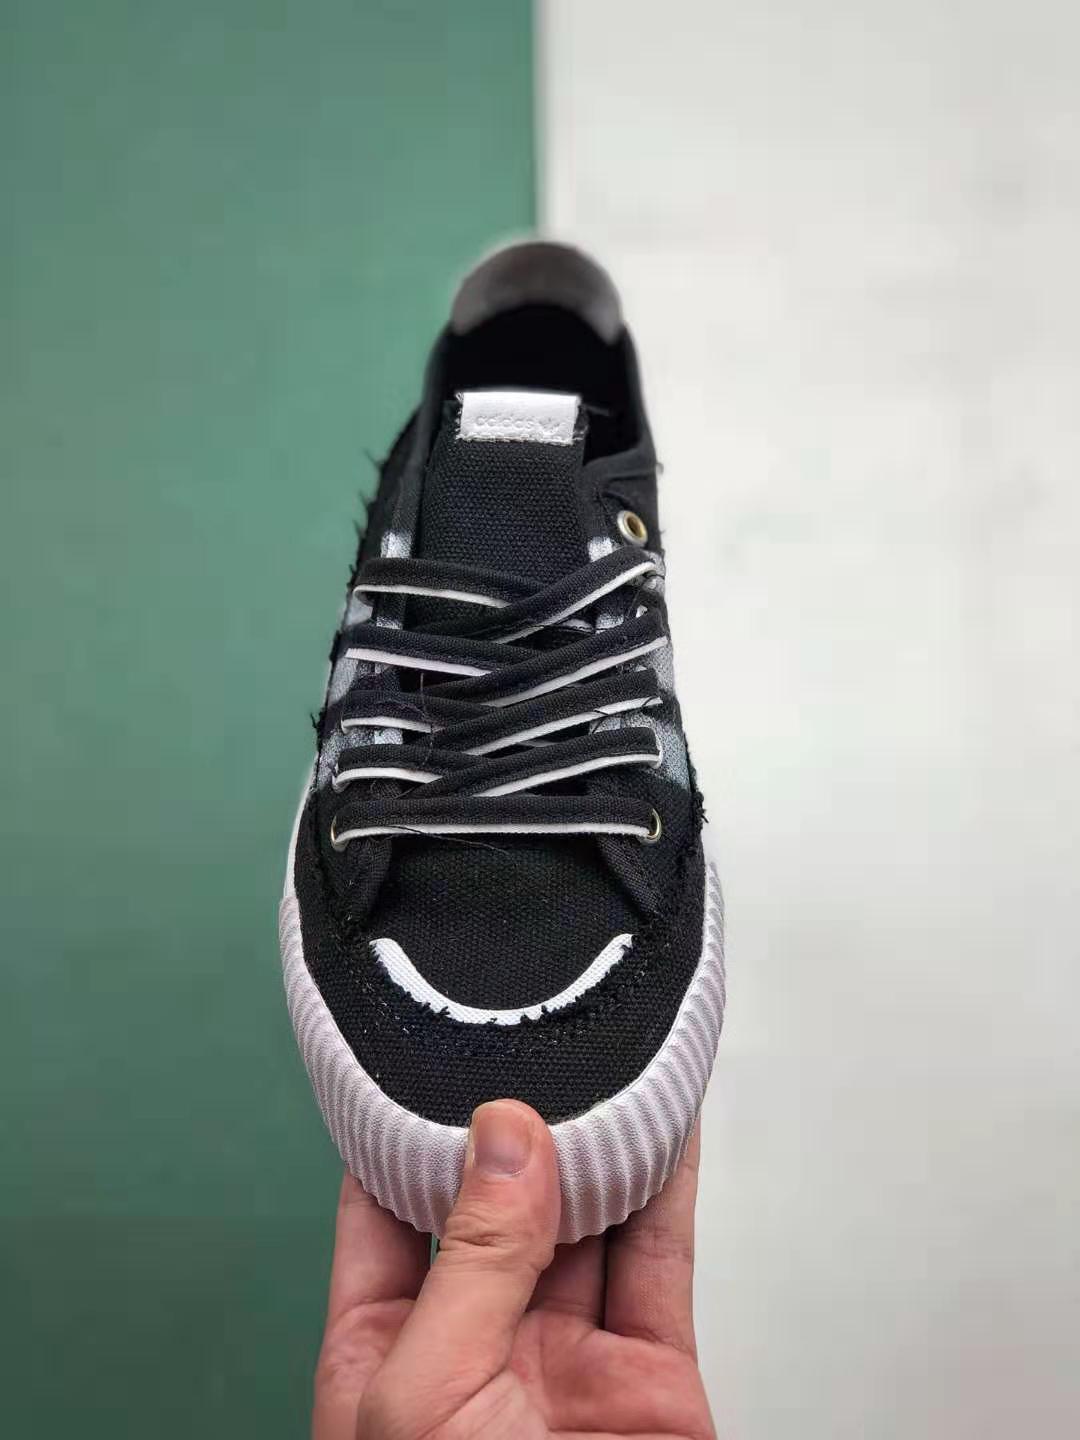 Donald Glover x Adidas Nizza Black: Sleek and Stylish Footwear for Any Occasion